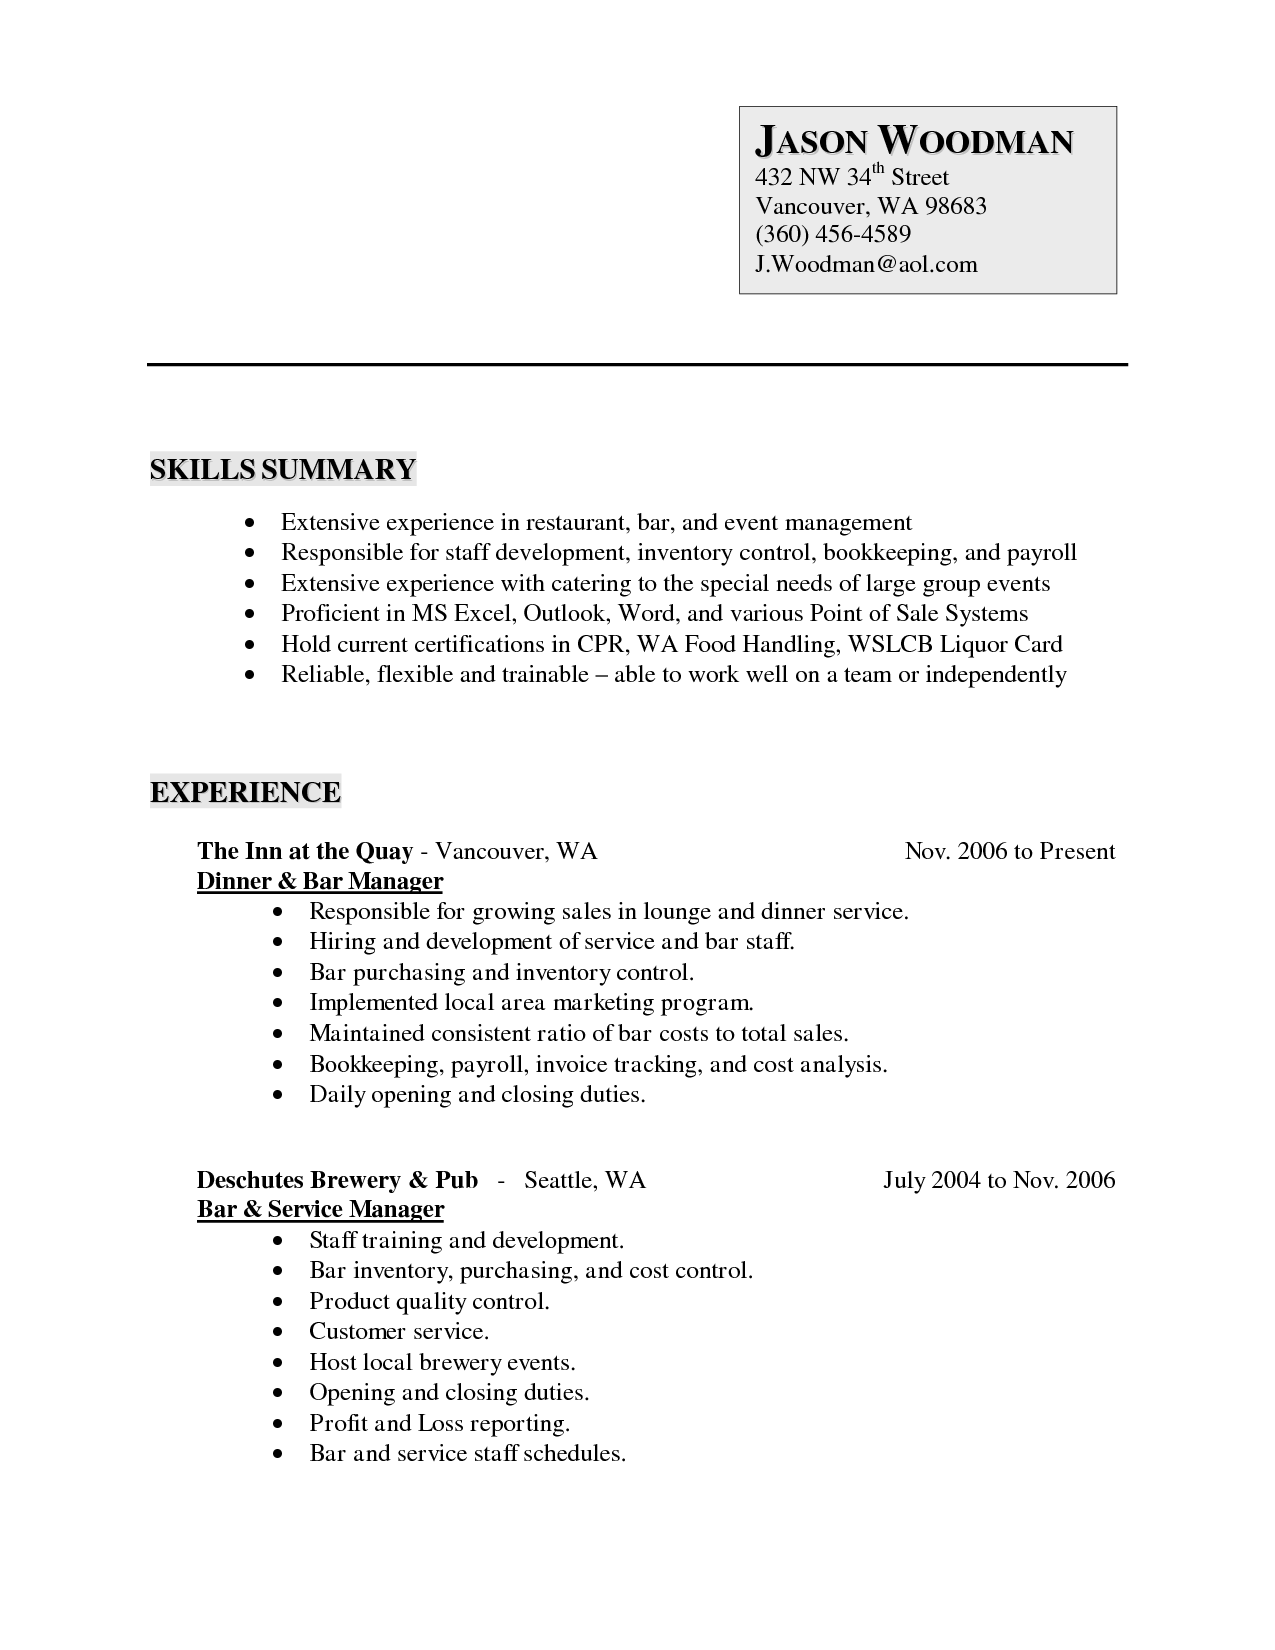 generic skills for resume   Ecza.solinf.co